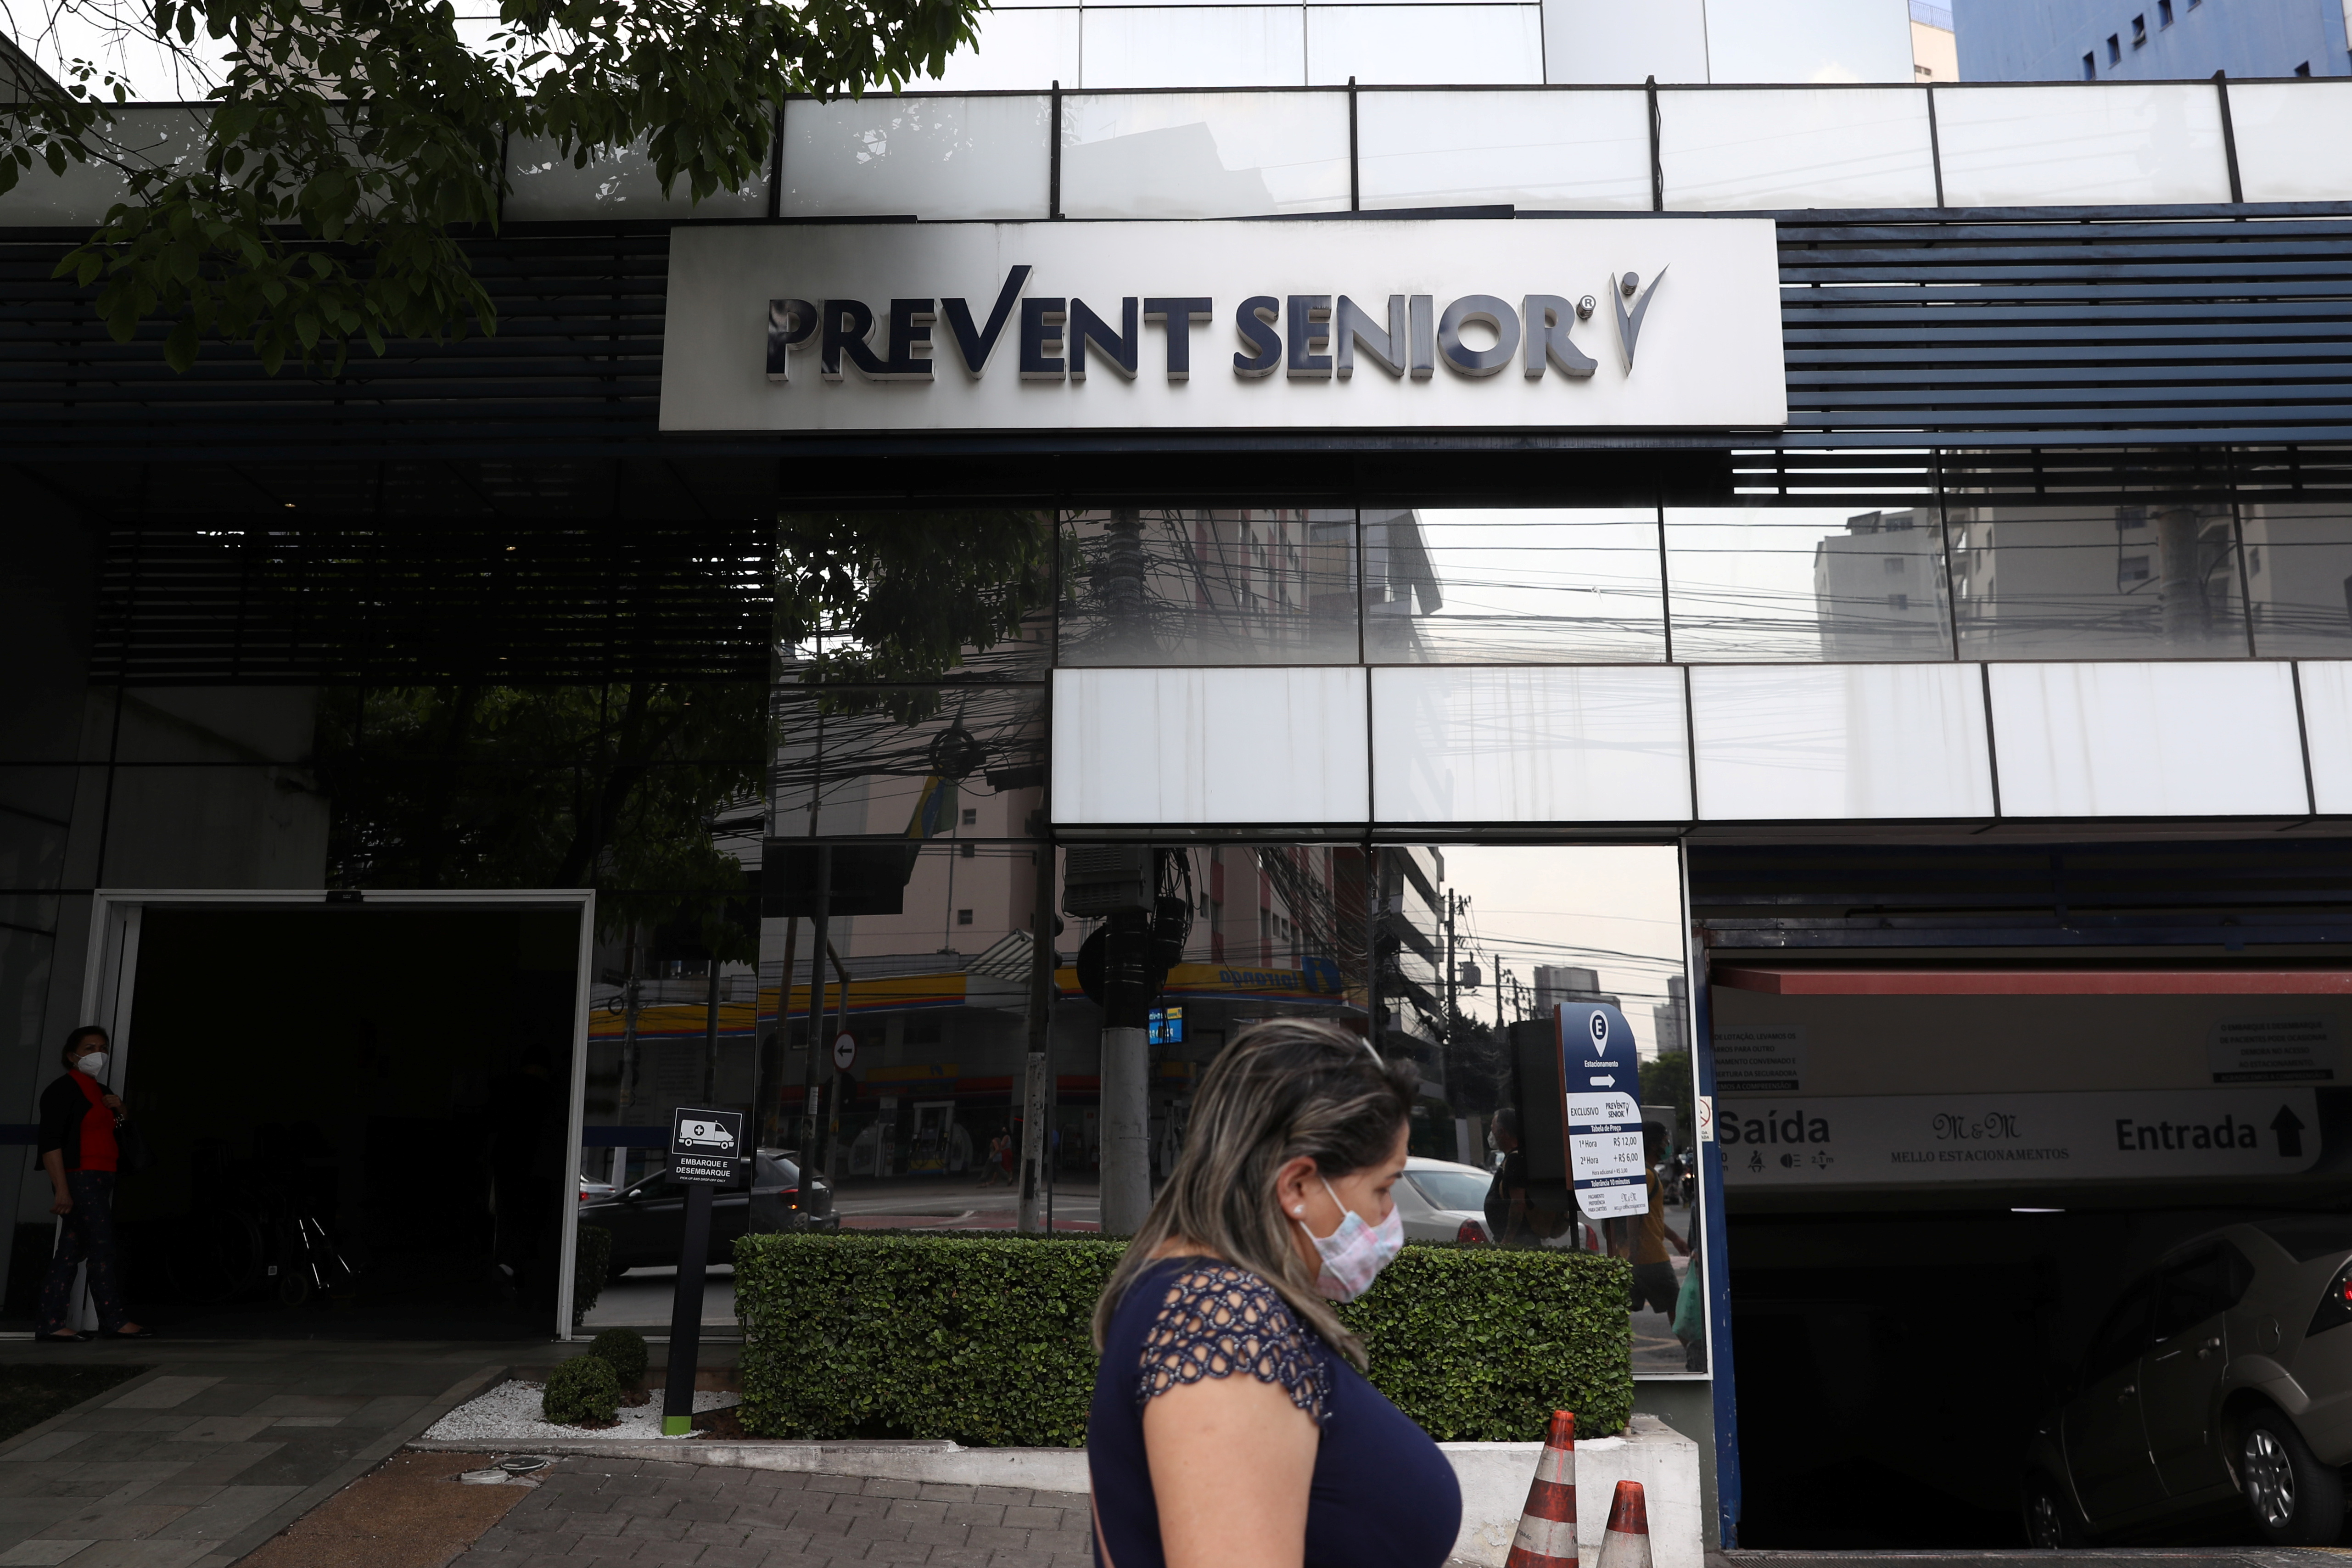 A woman passes by the entrance of a Prevent Senior hospital chain unity in Sao Paulo, Brazil September 28, 2021. REUTERS/Amanda Perobelli